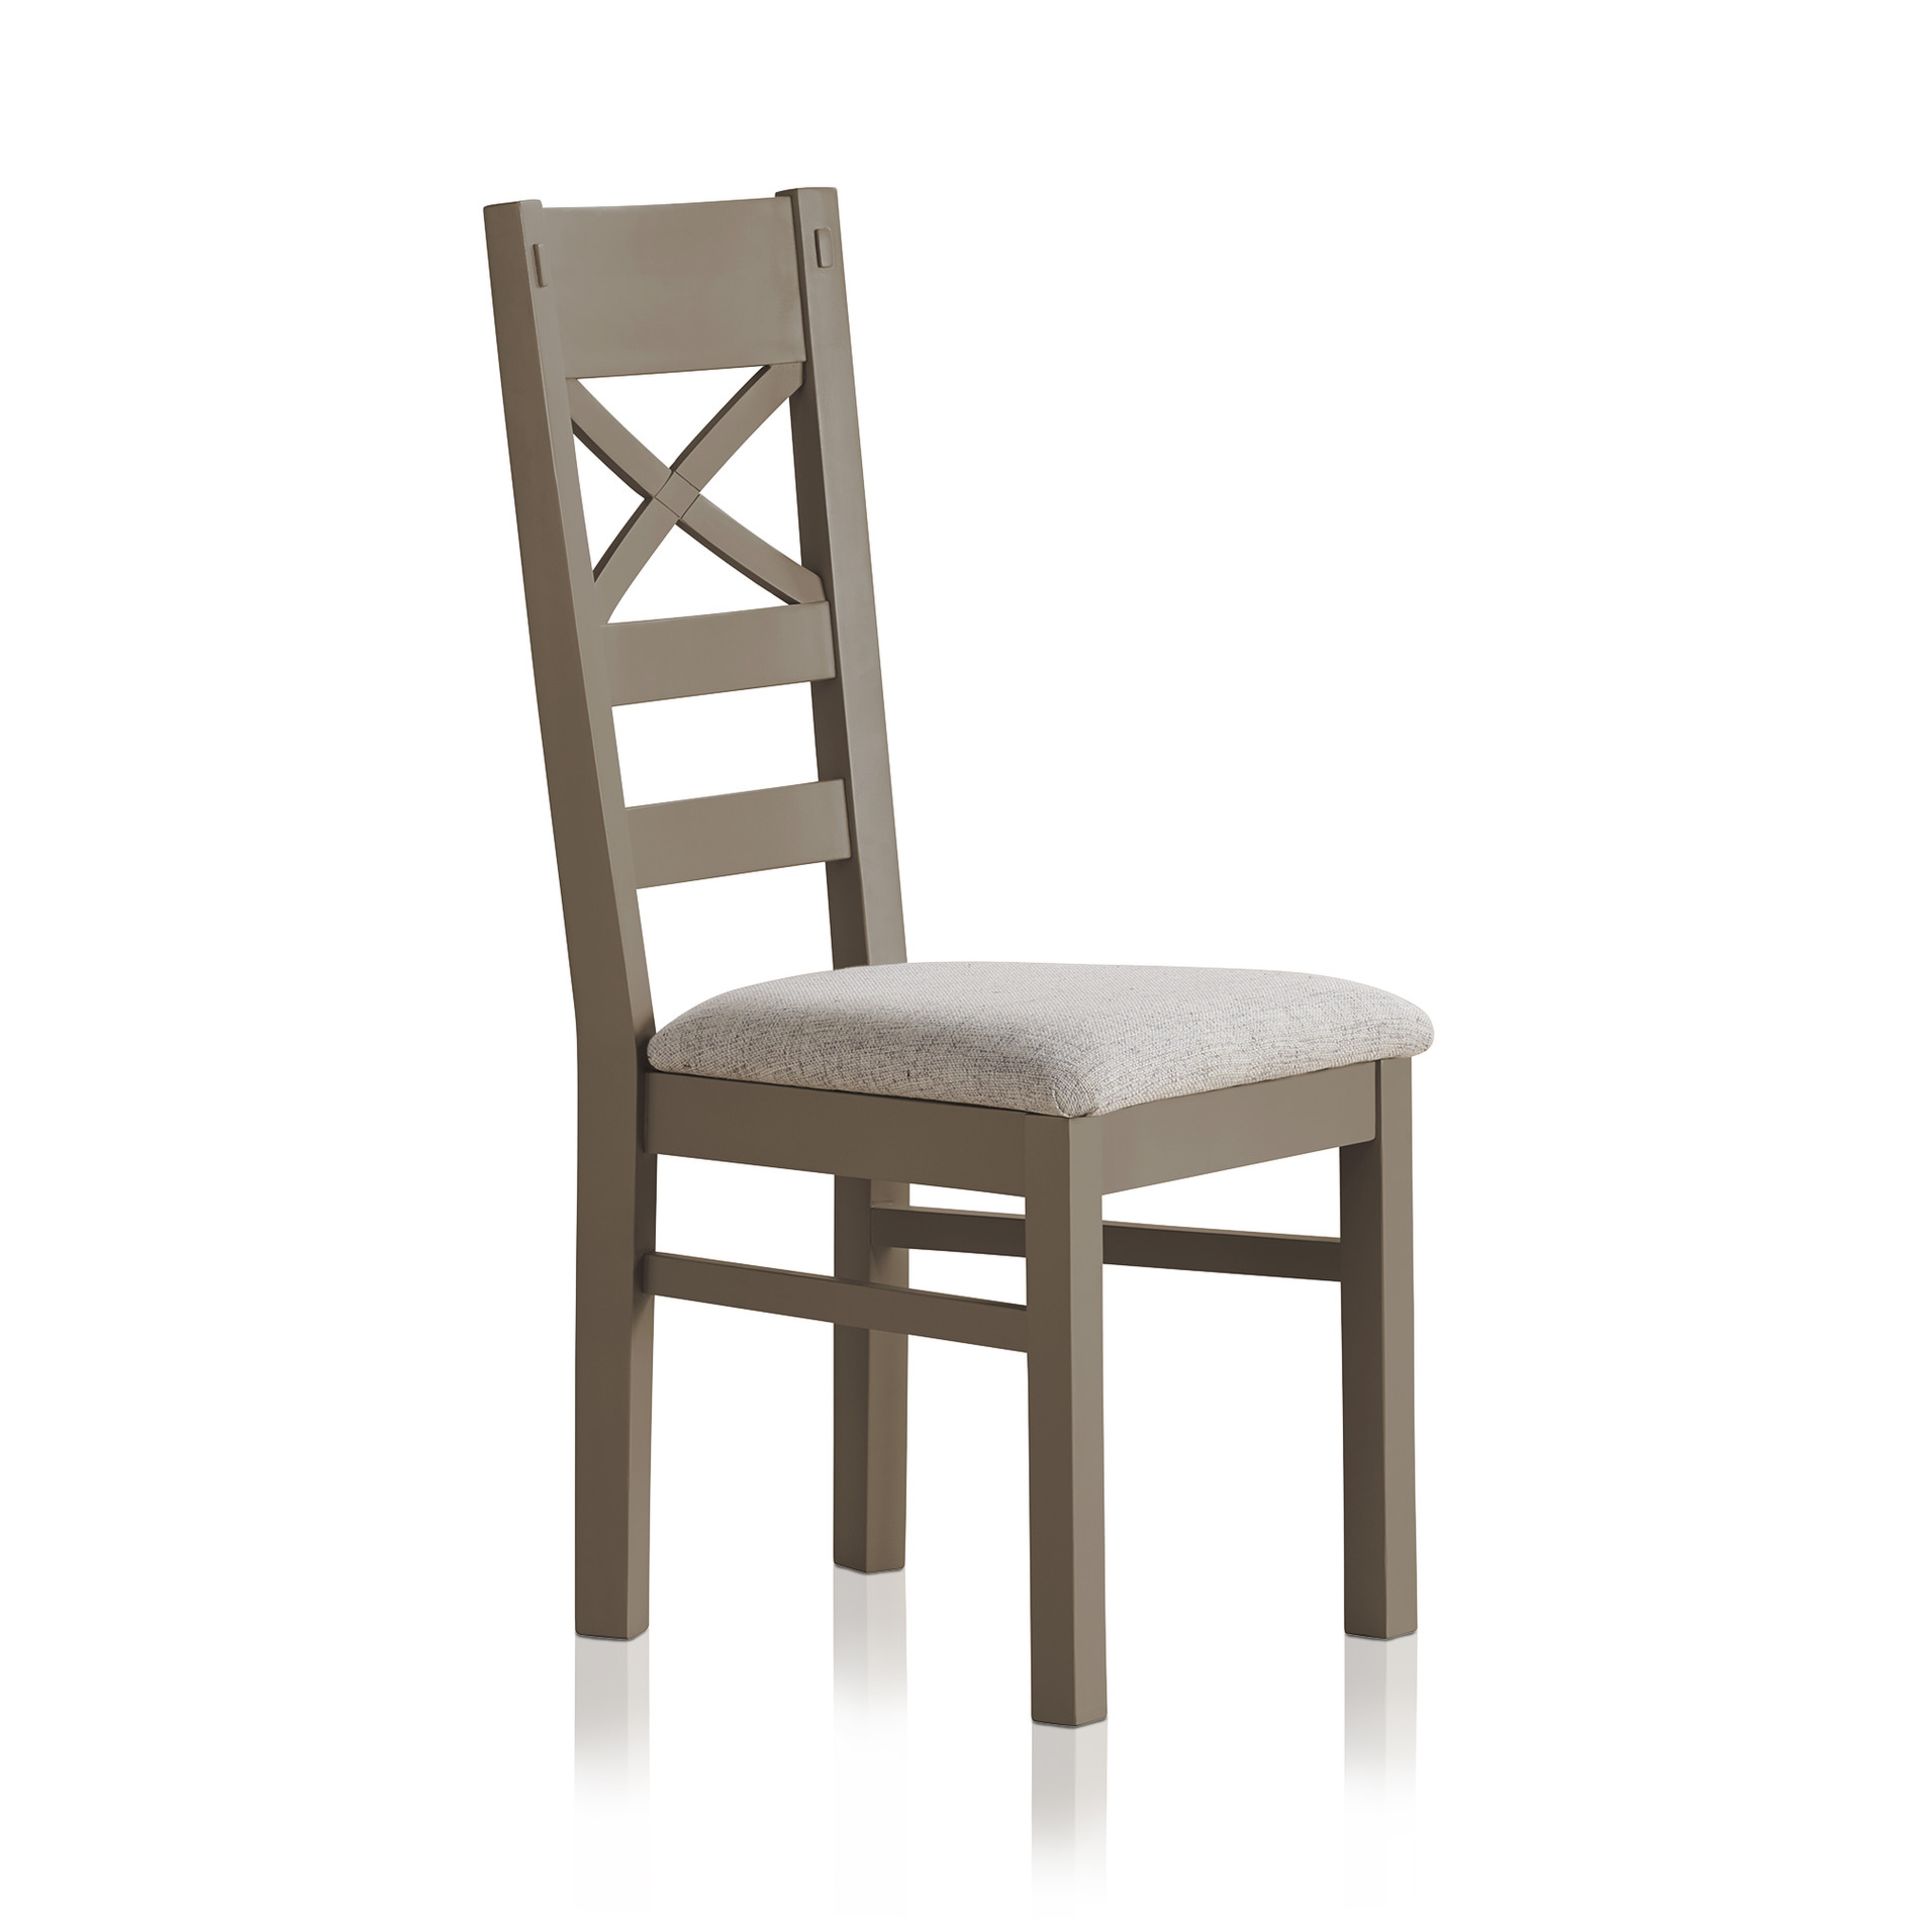 Oak Furnitureland St Ives Light Grey Painted Chair With Plain Grey Fabric Seat RRP 170.00 These - Image 2 of 2